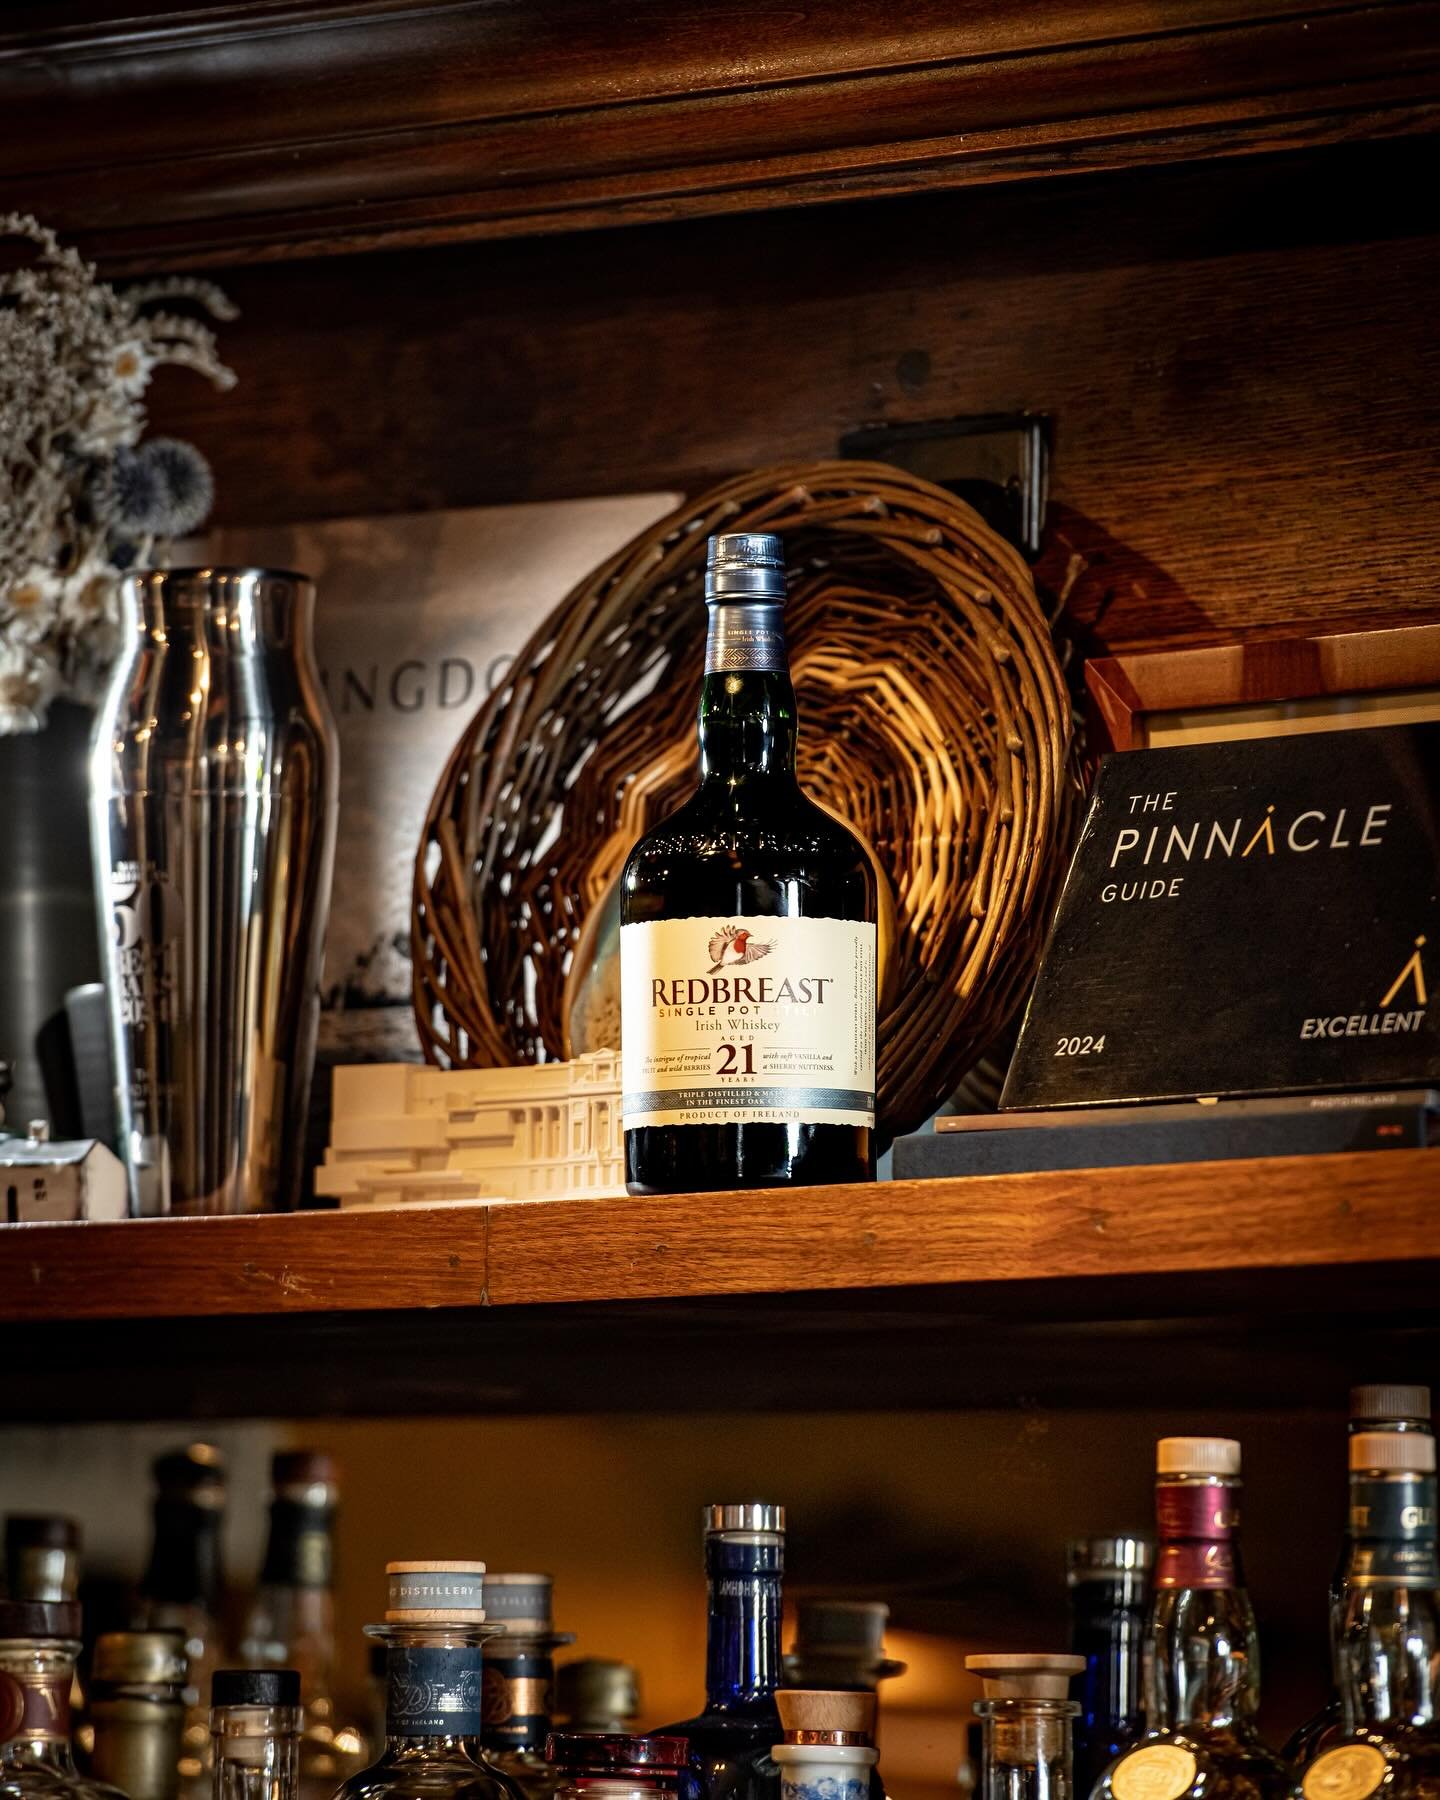 Yes, we have hundreds of bottles of Irish Whiskey on our back bars - but we don&rsquo;t have the largest collection in the world. Our list is curated and hand-picked, representing best-in-class drams in a variety of styles at varying price points, pu